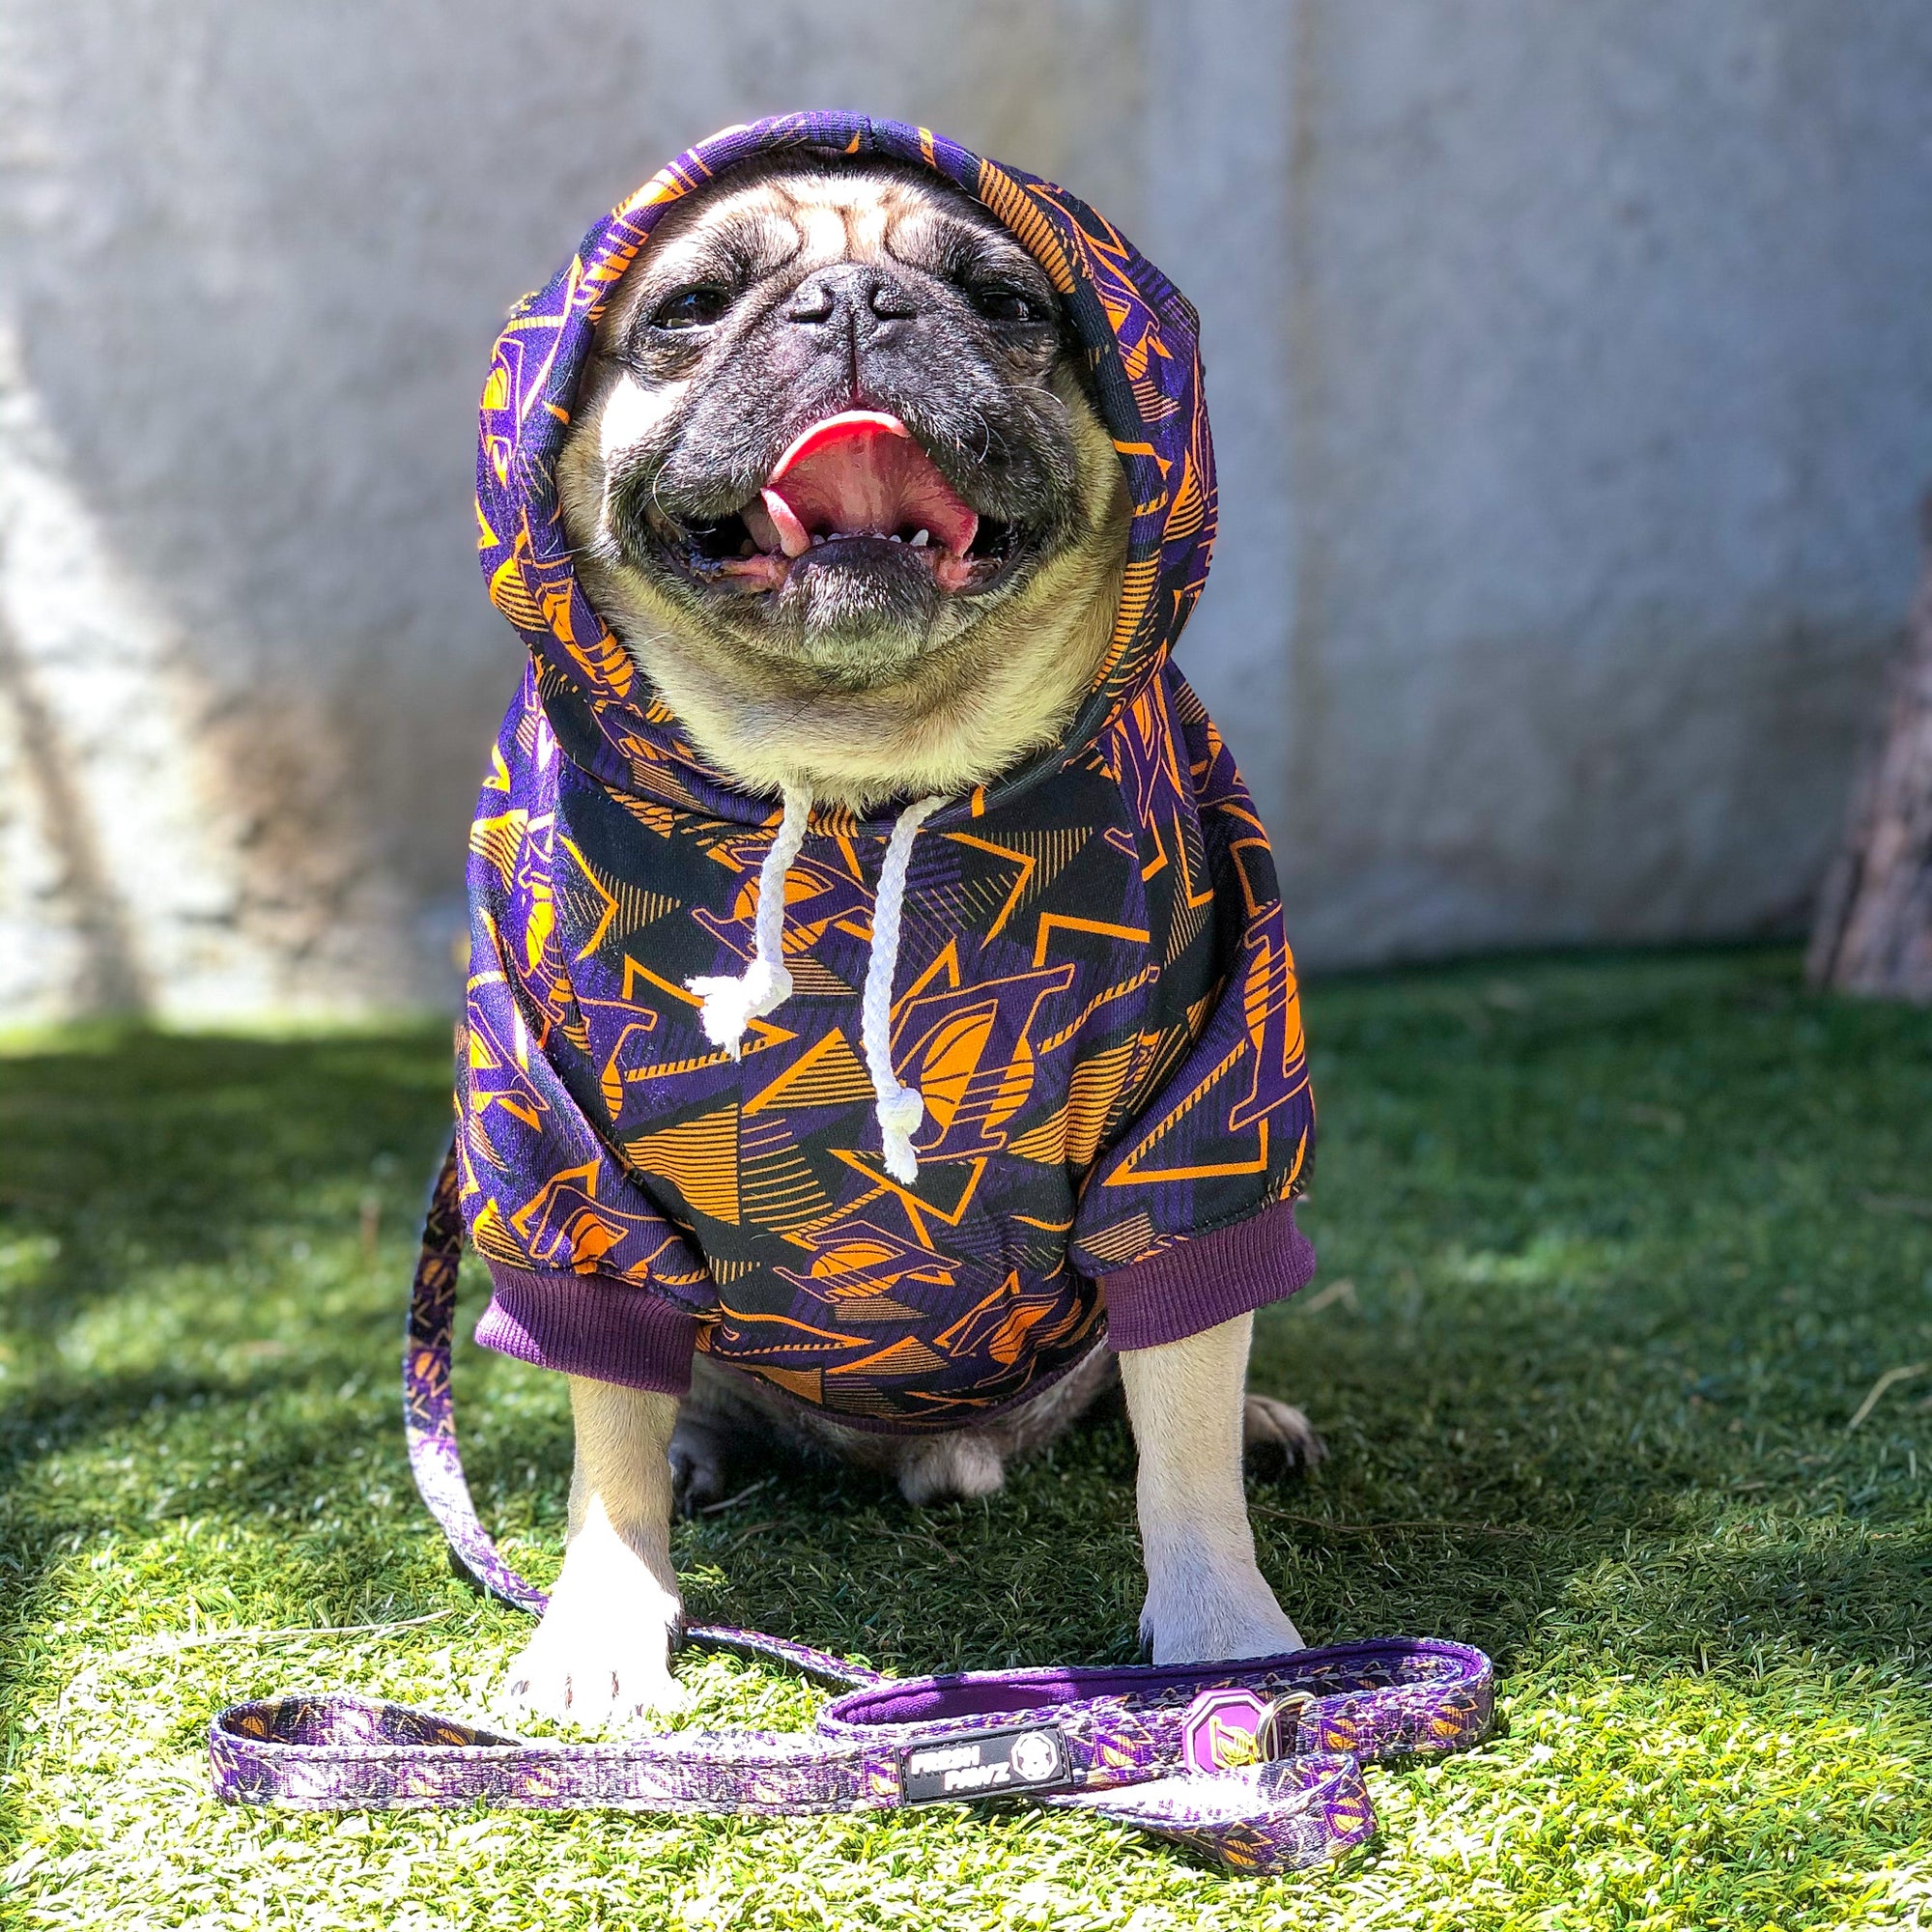 Pucci Dog Park Hoodie, Dog Clothing